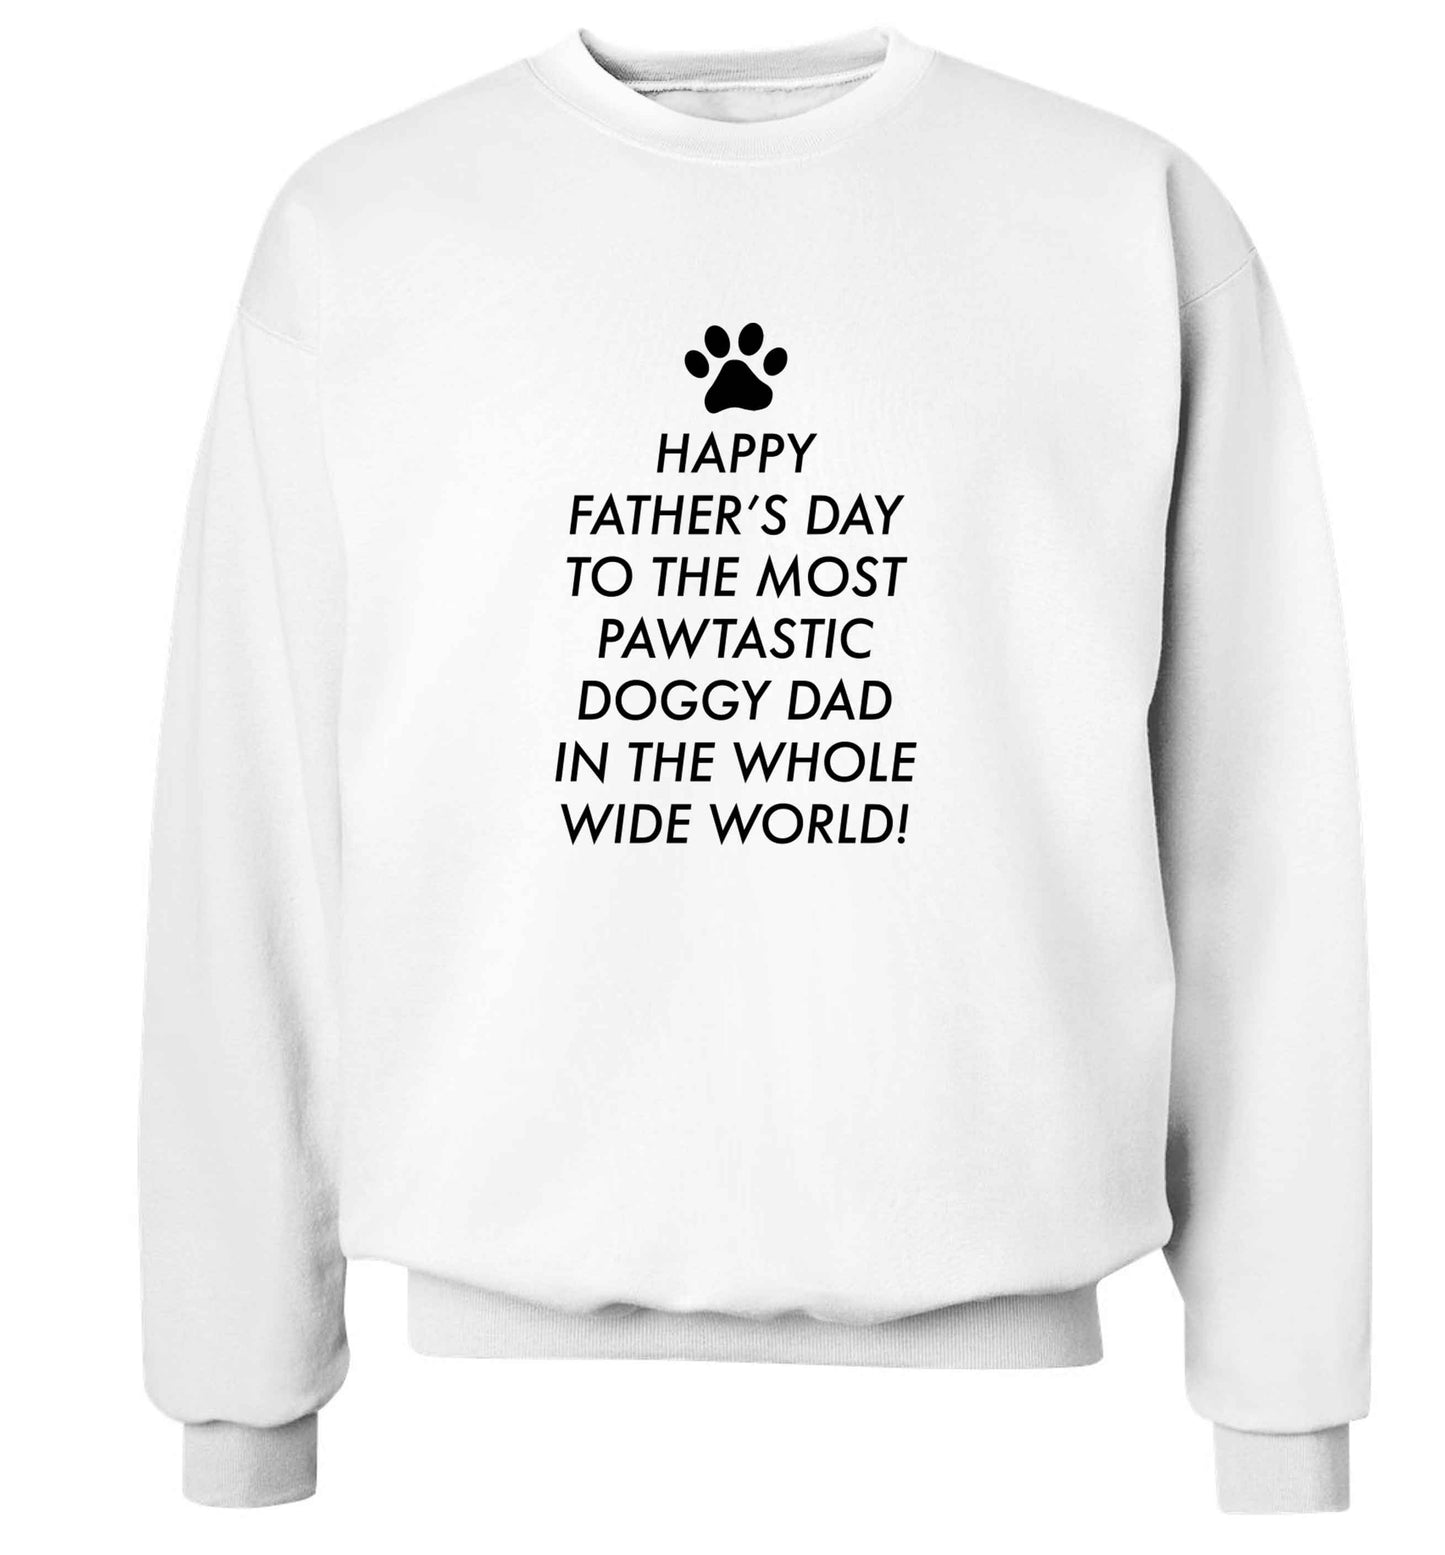 Happy Father's day to the most pawtastic doggy dad in the whole wide world!adult's unisex white sweater 2XL